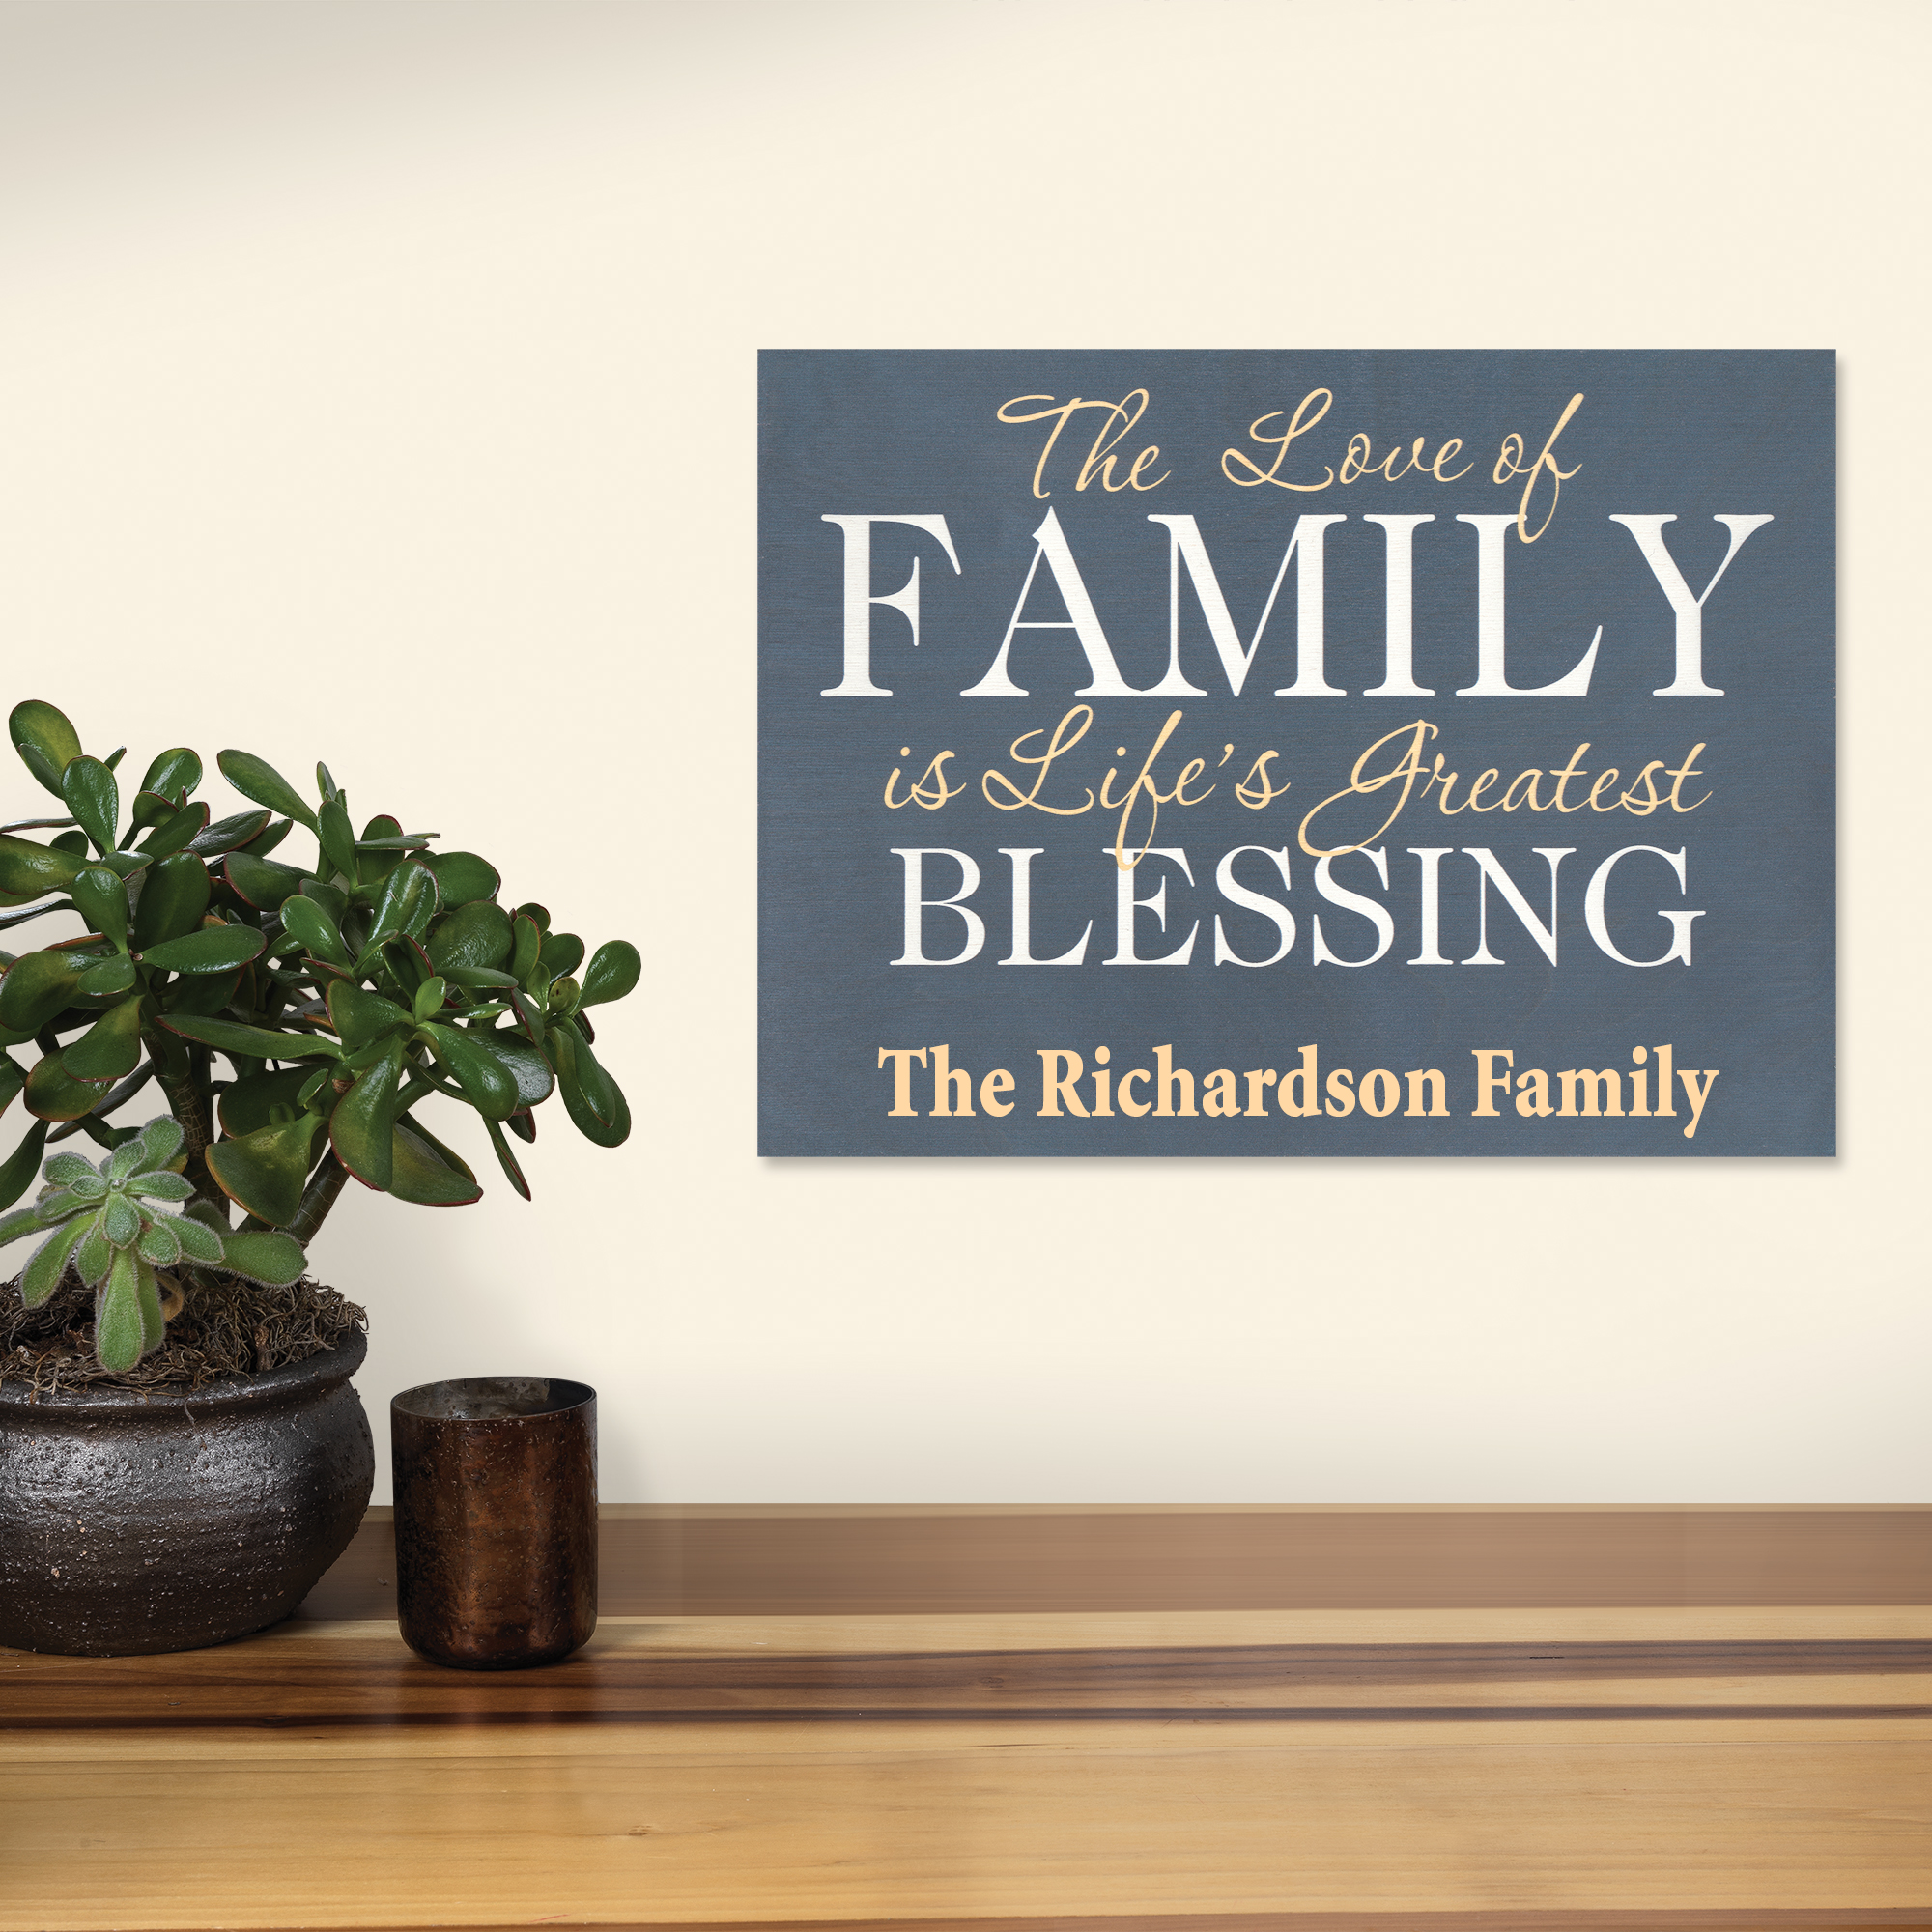 The Personalized Blessing Wood Sign 5694 001 8 1